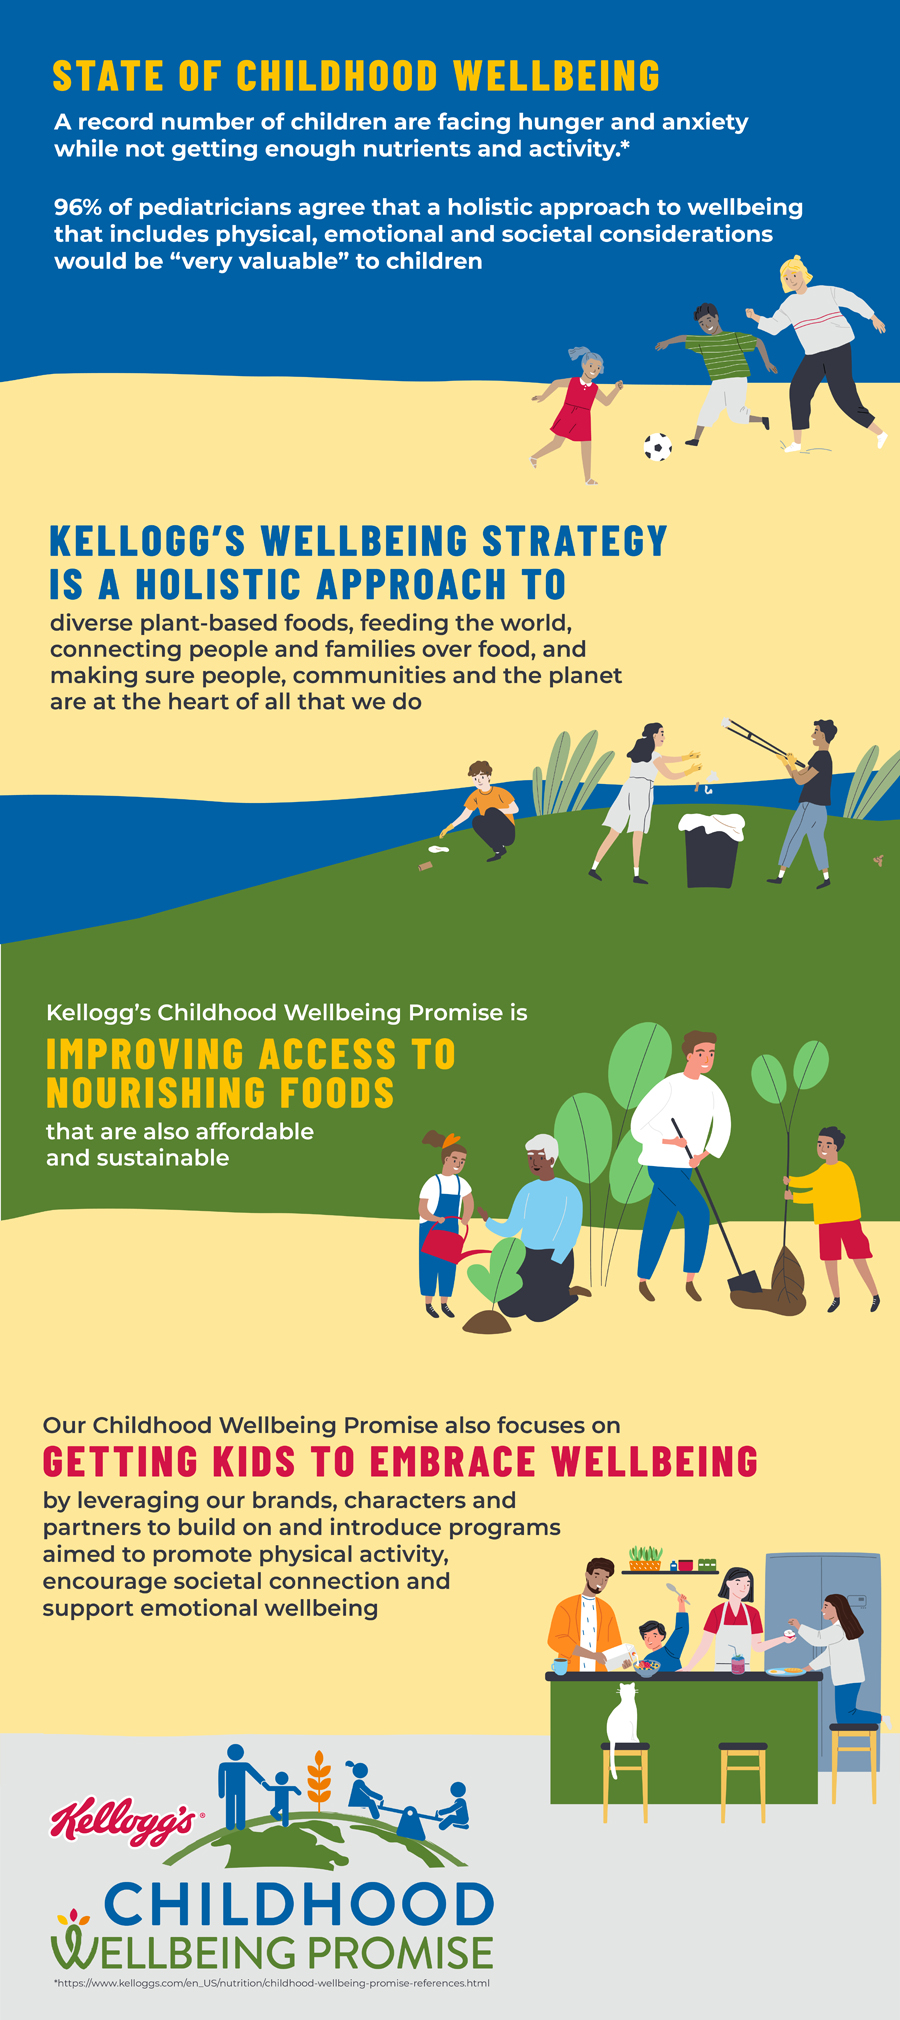 Childhood Wellbeing Promise is a holistic approach to diverse plant-based foods, feeding the world, connecting people and families over food, and making sure people , communities and the planet are at the heart of all that we do